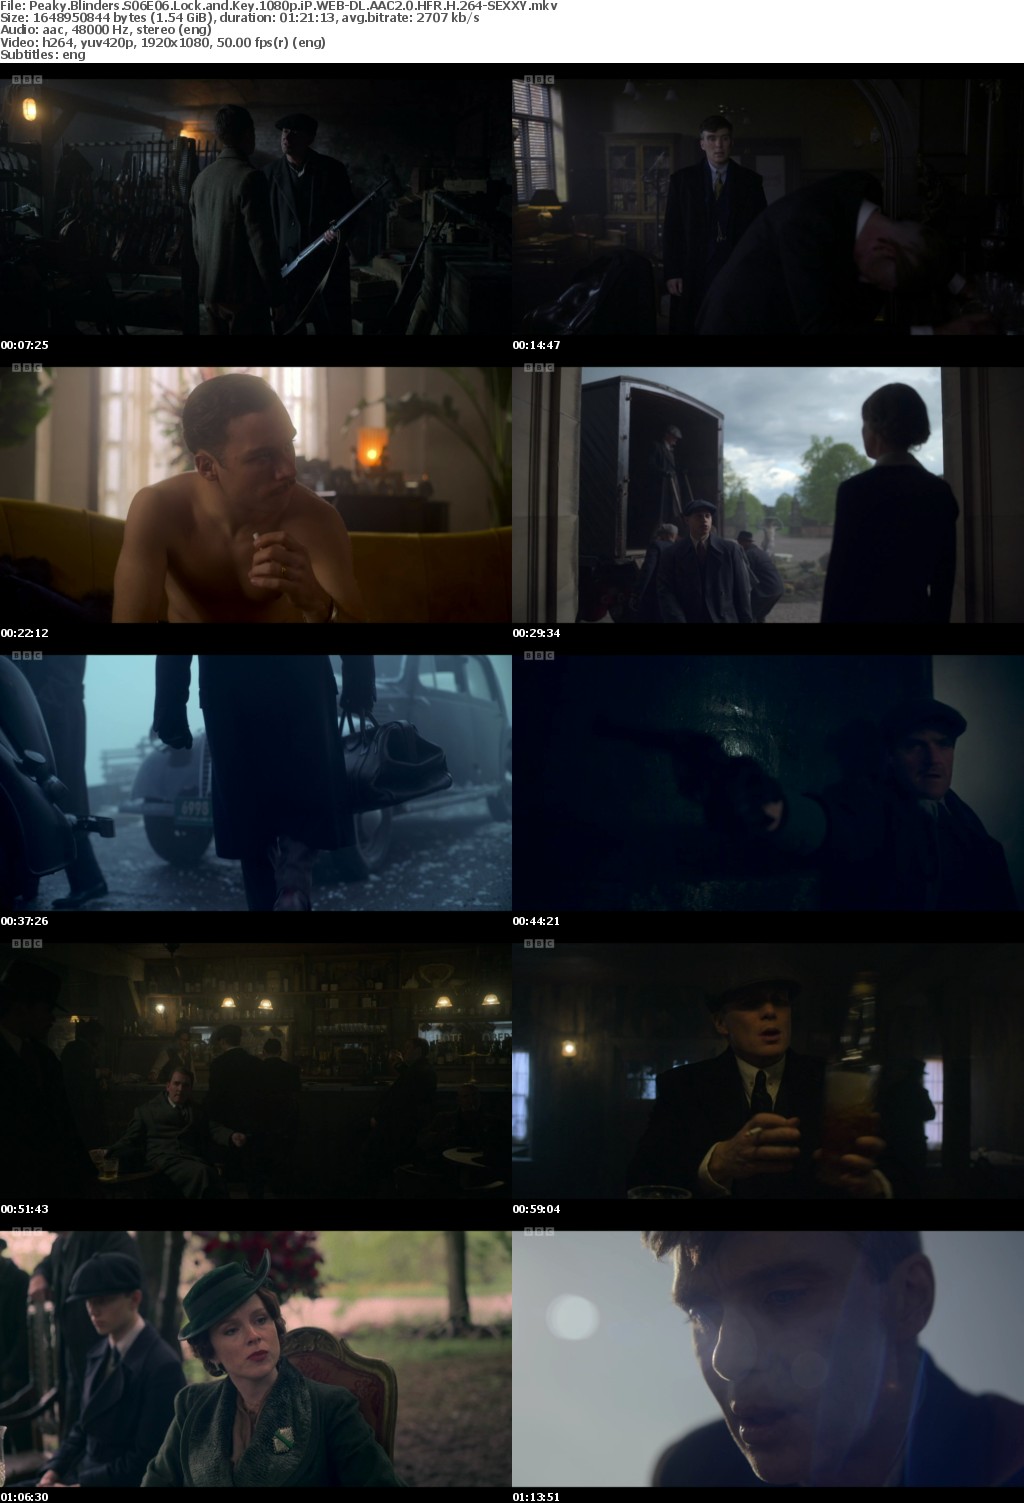 Peaky Blinders S06E06 Lock and Key 1080p iP WEB-DL AAC2 0 HFR H 264-SEXXY